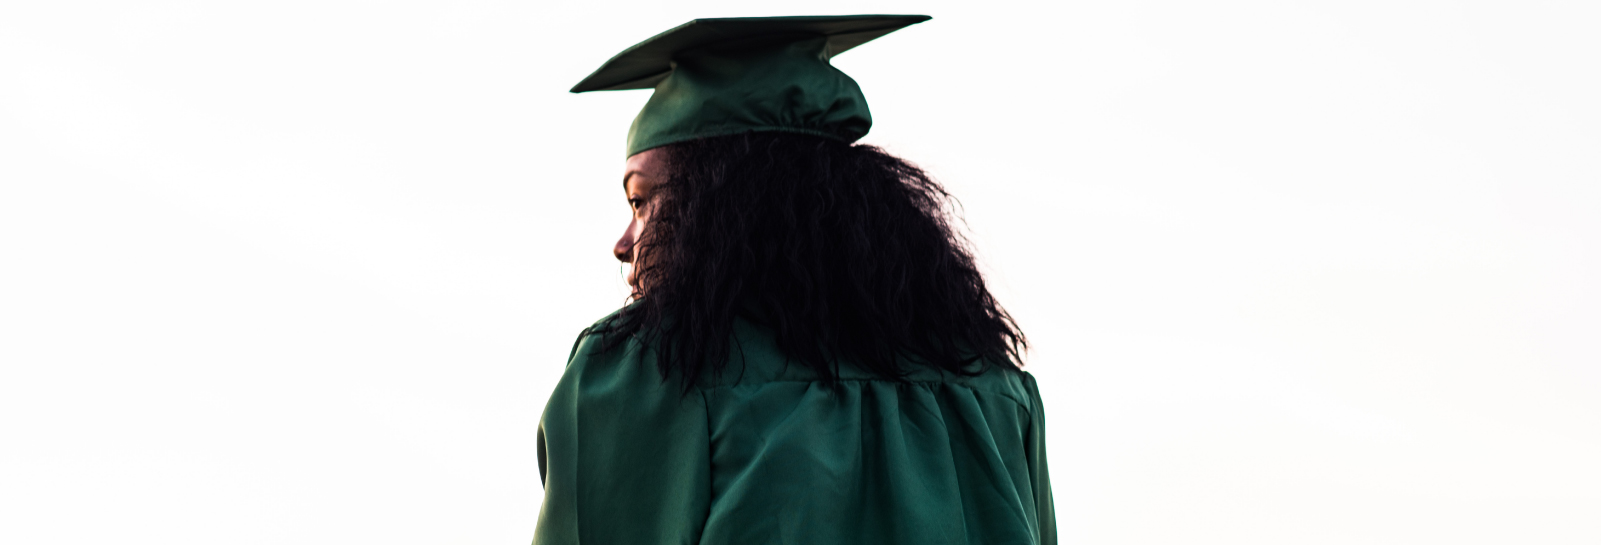 a behind shot of a woman in a graduation cap and gown